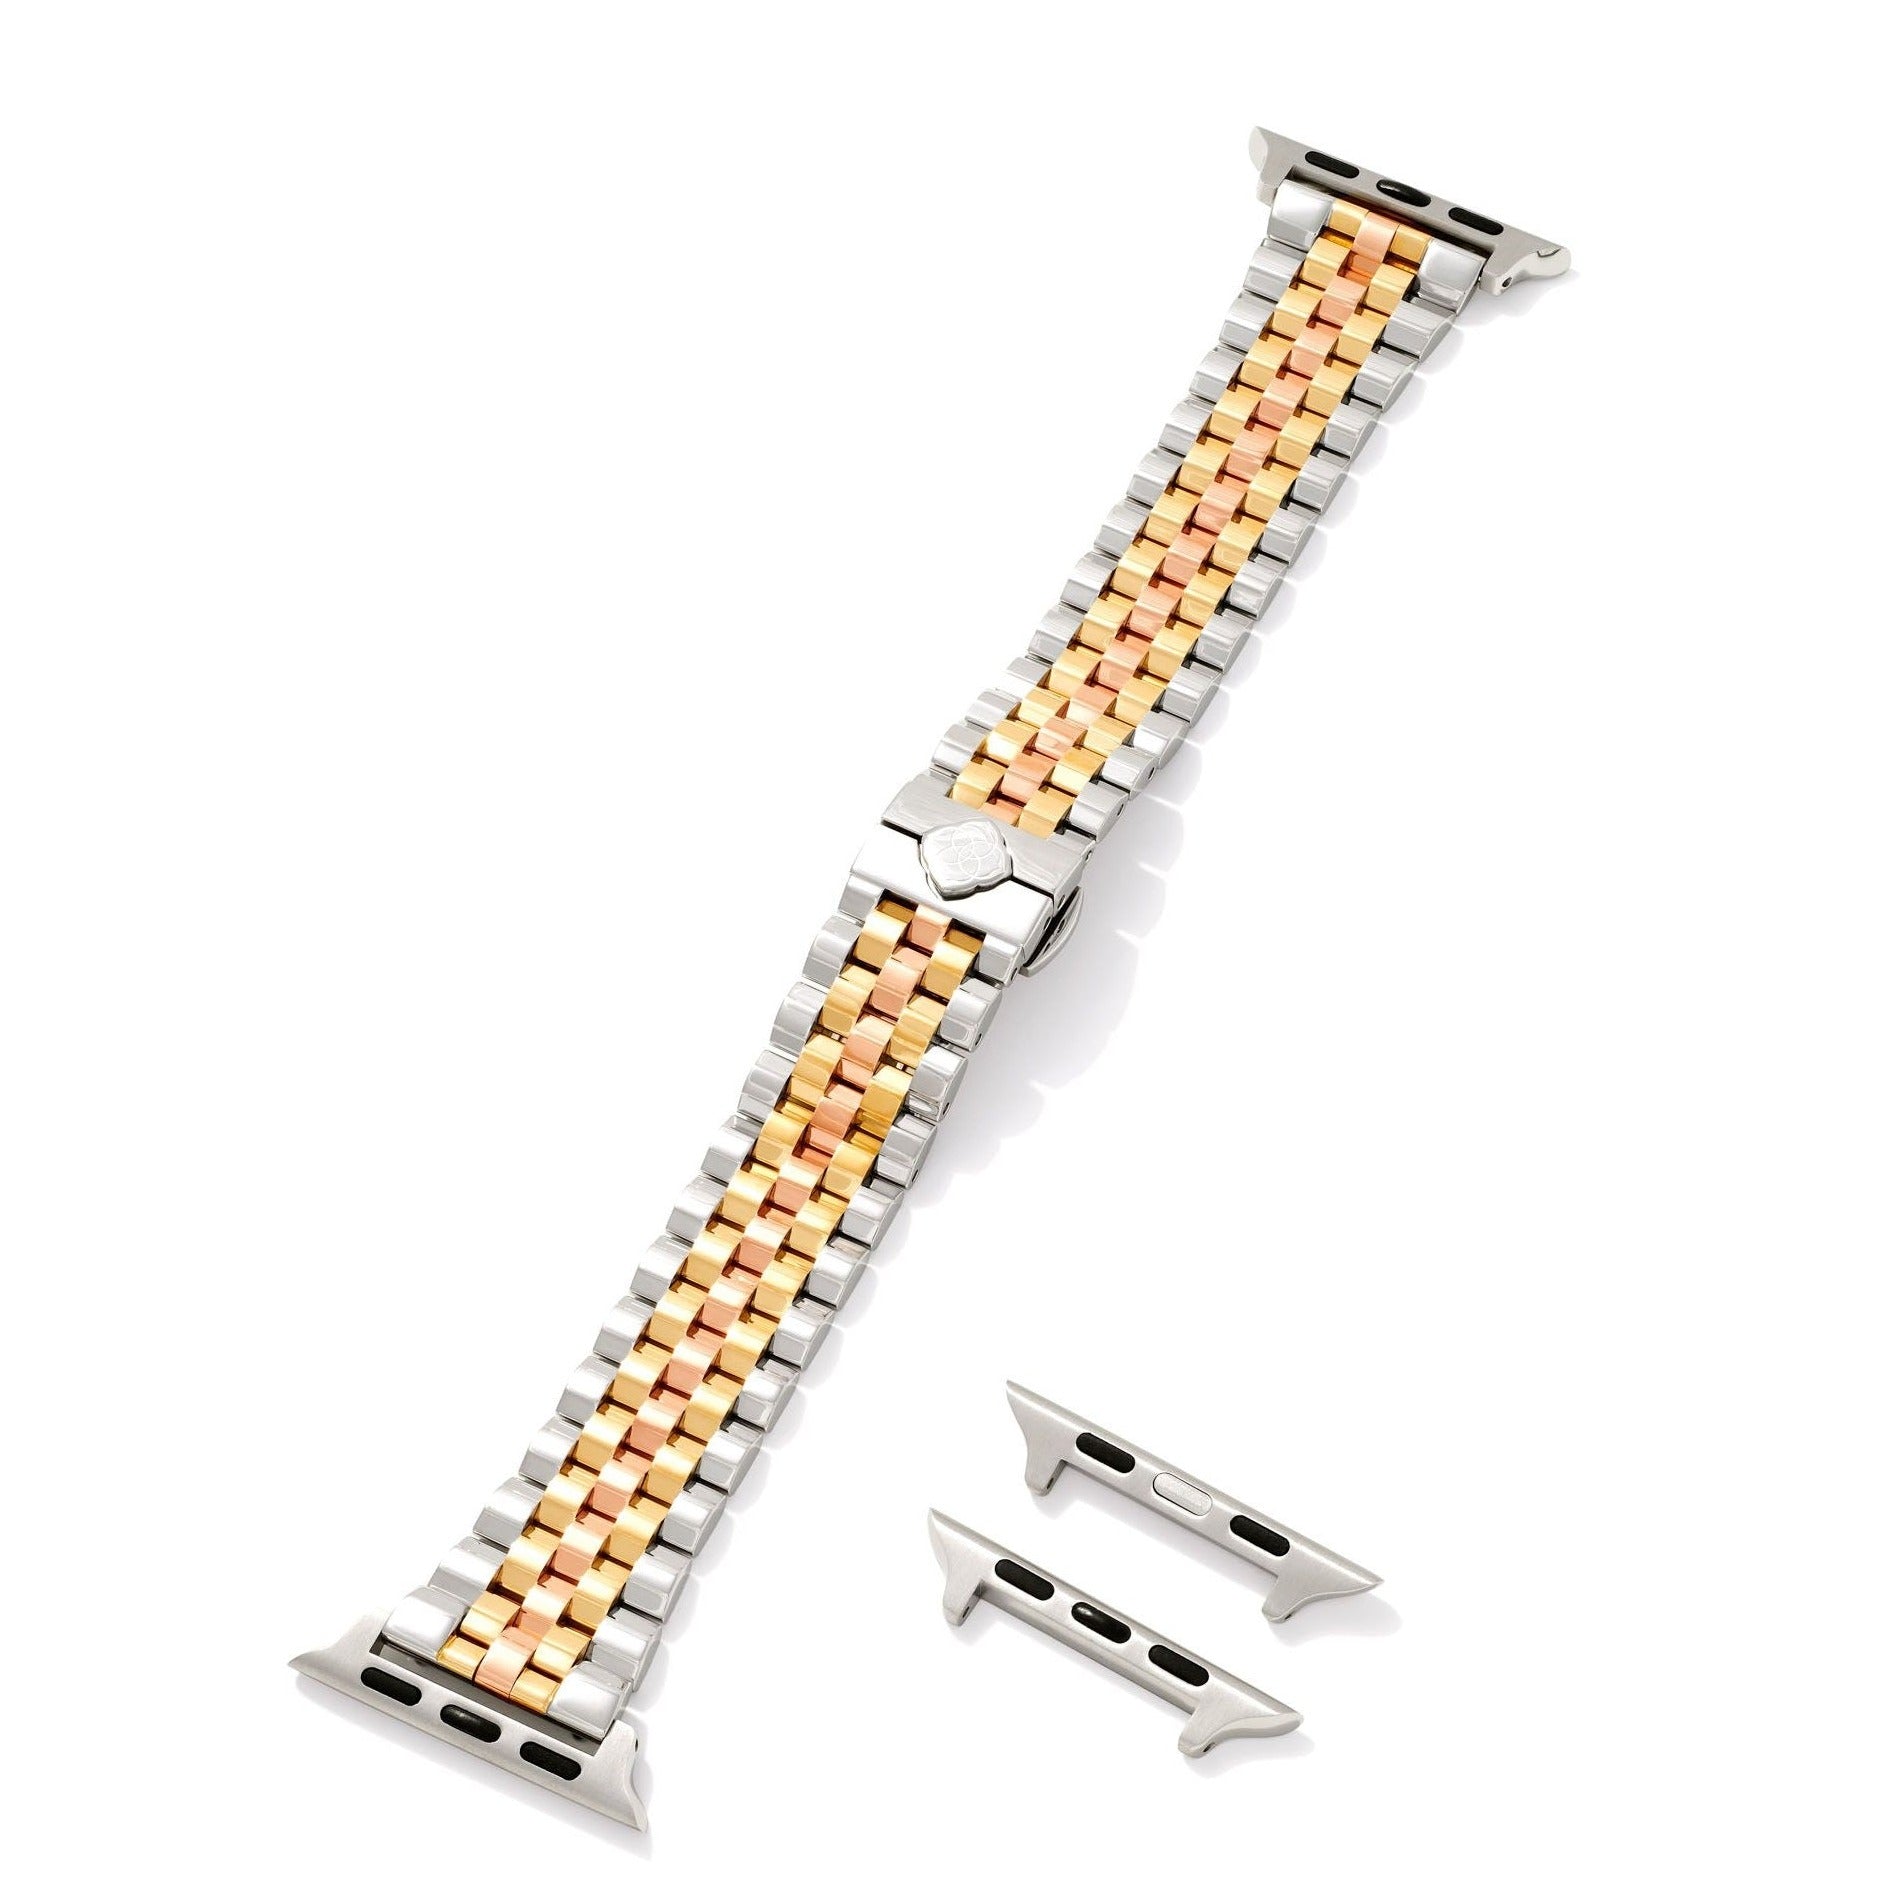 Kendra Scott | Alex 5 Link Watch Band in Tri Tone Stainless Steel